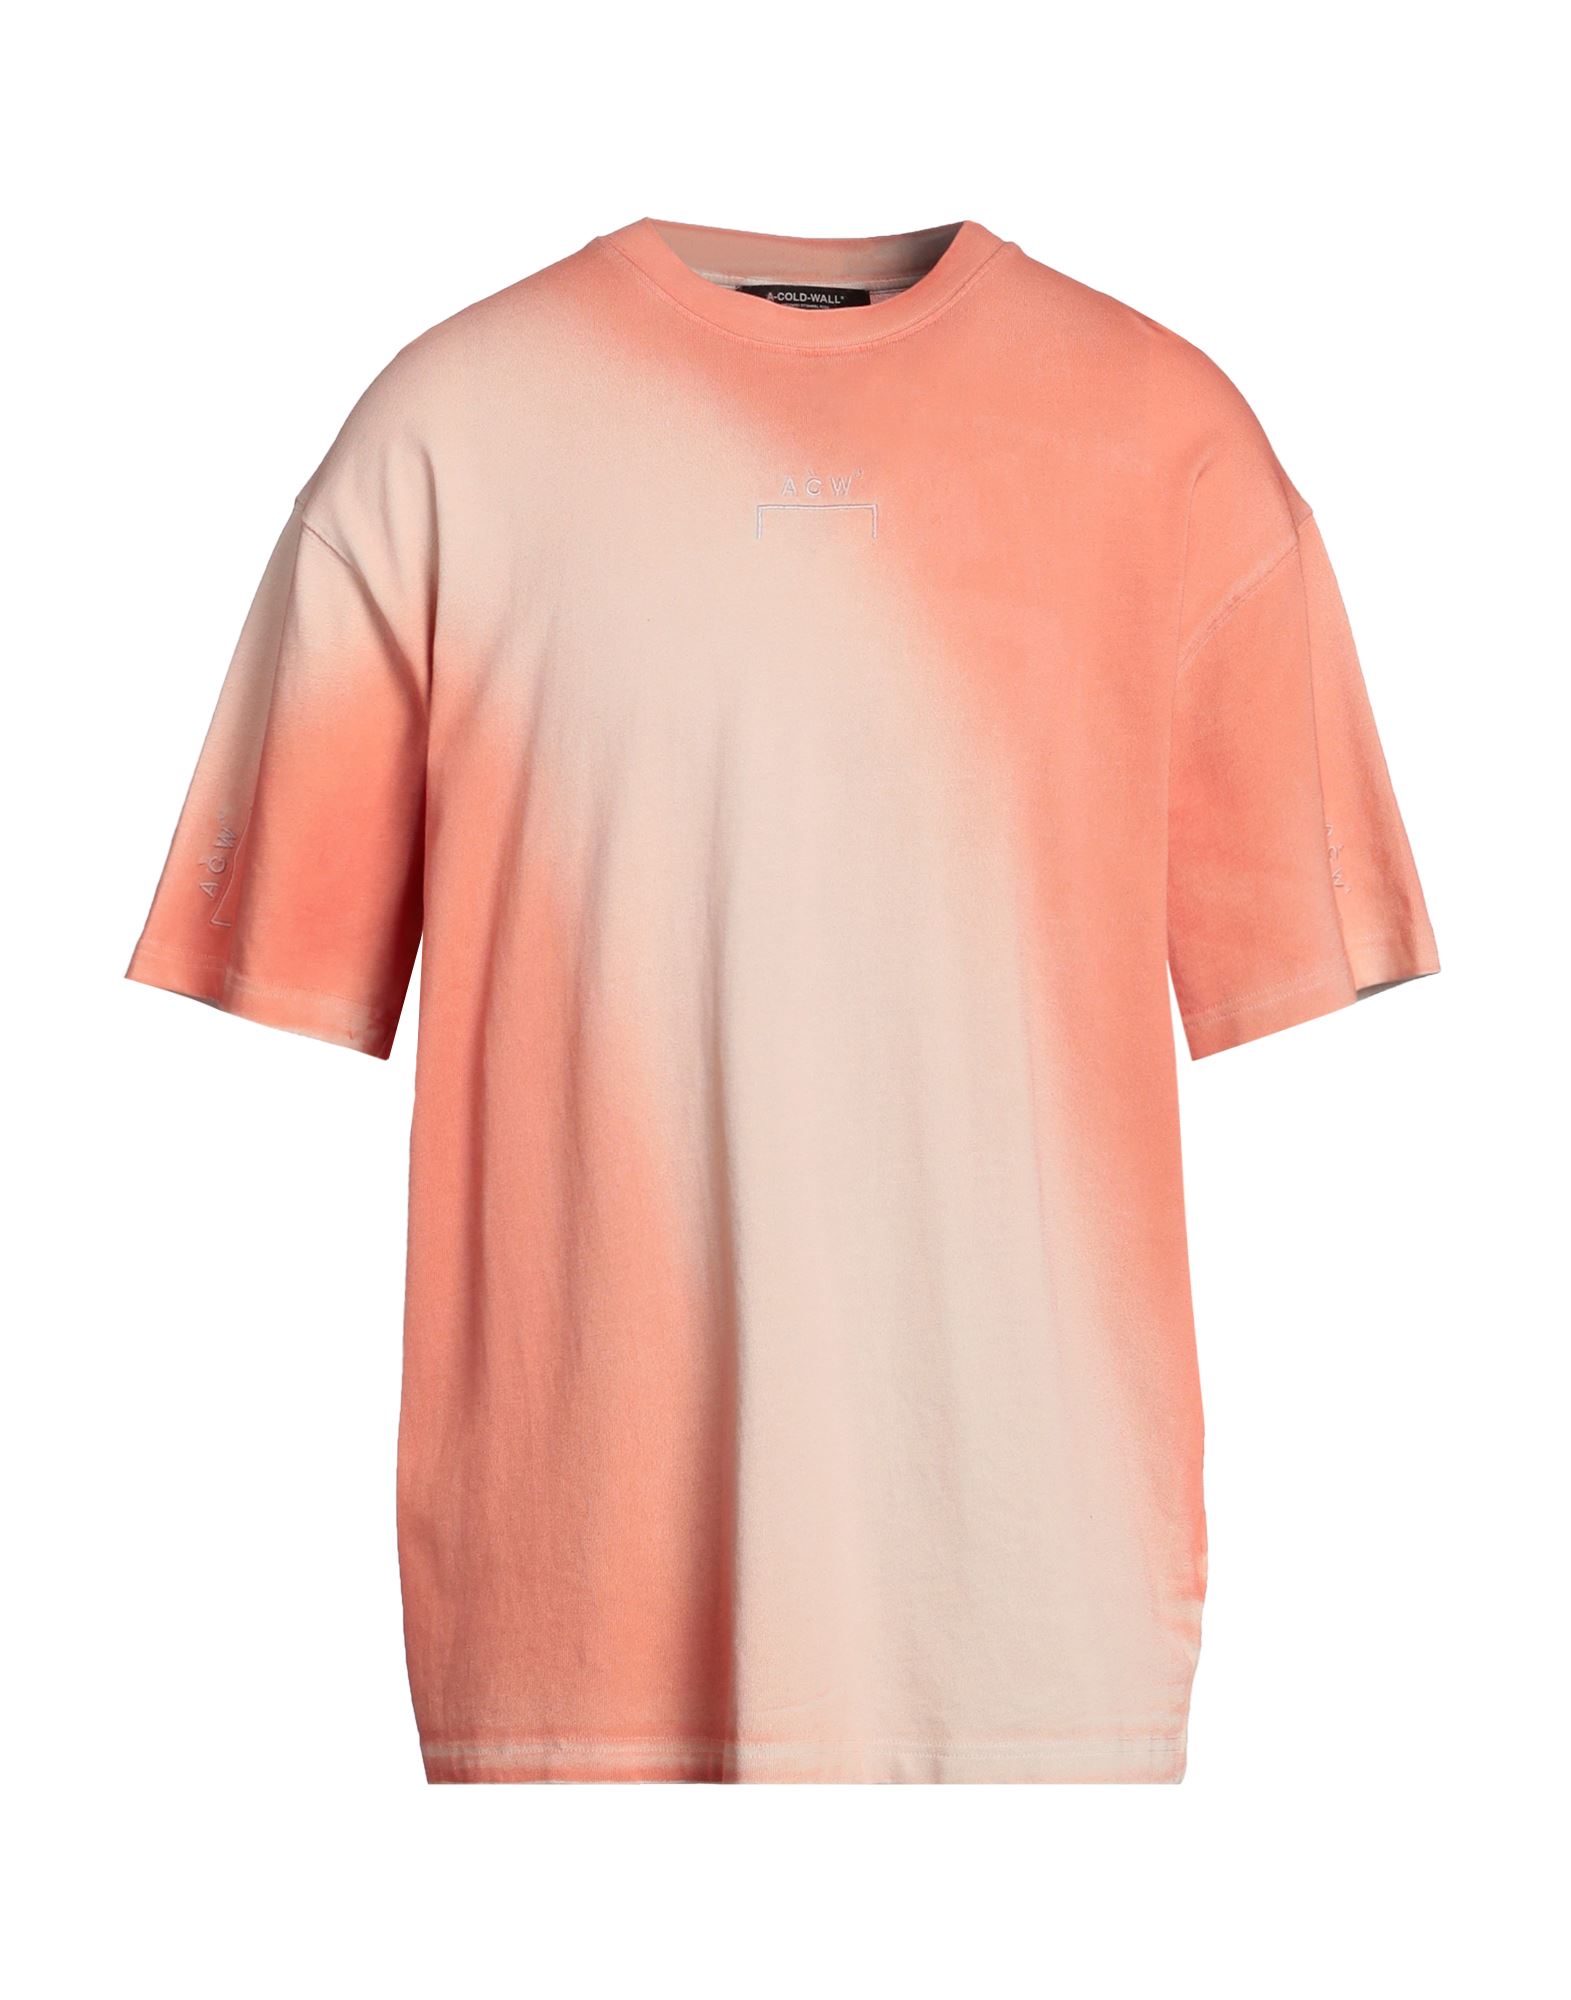 A-COLD-WALL* T-shirts Herren Rostrot von A-COLD-WALL*